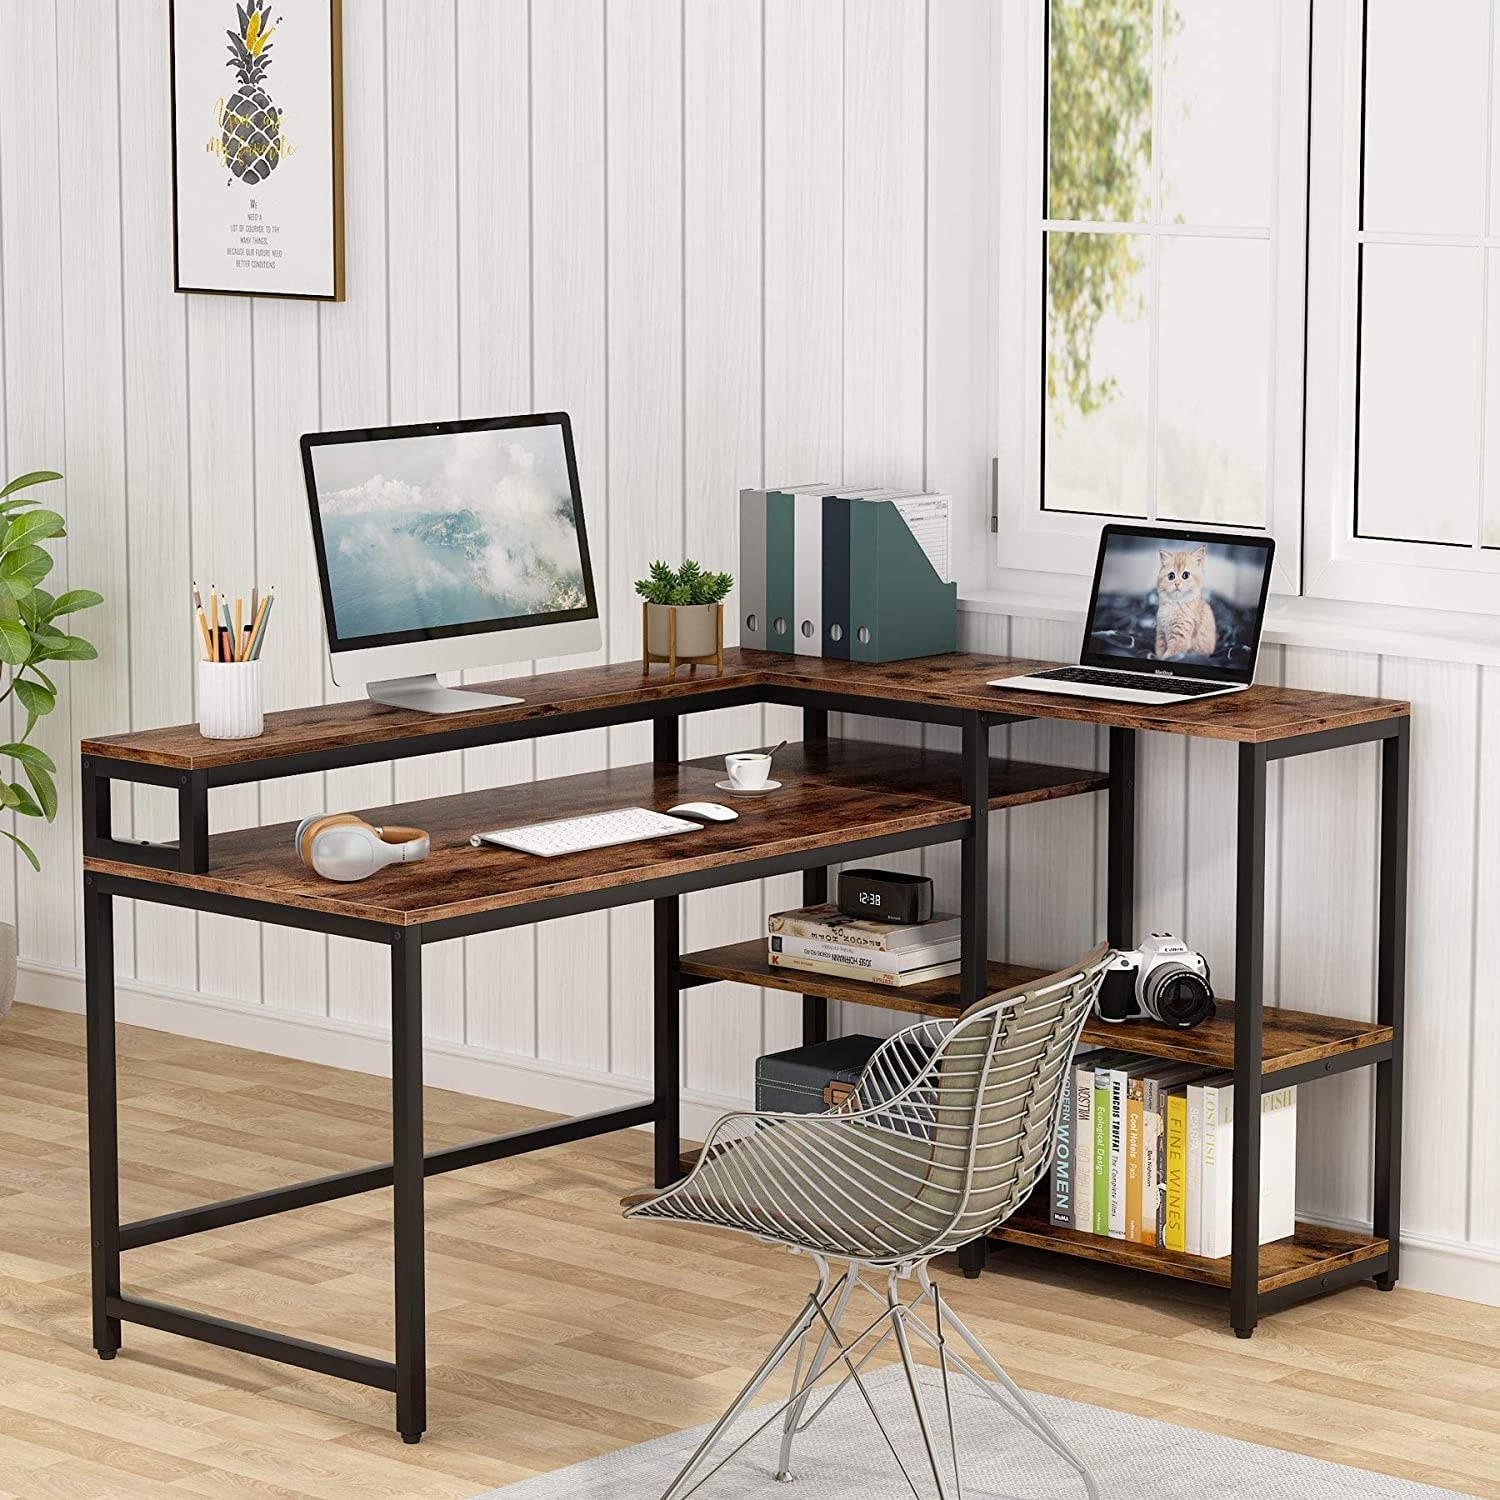 https://ak1.ostkcdn.com/images/products/is/images/direct/34f884ae8ae4aefaefc6ab5c89c8c635e3a46698/Reversible-L-Shaped-Computer-Desk-with-Storage-Shelf-and-Monitor-Stand.jpg